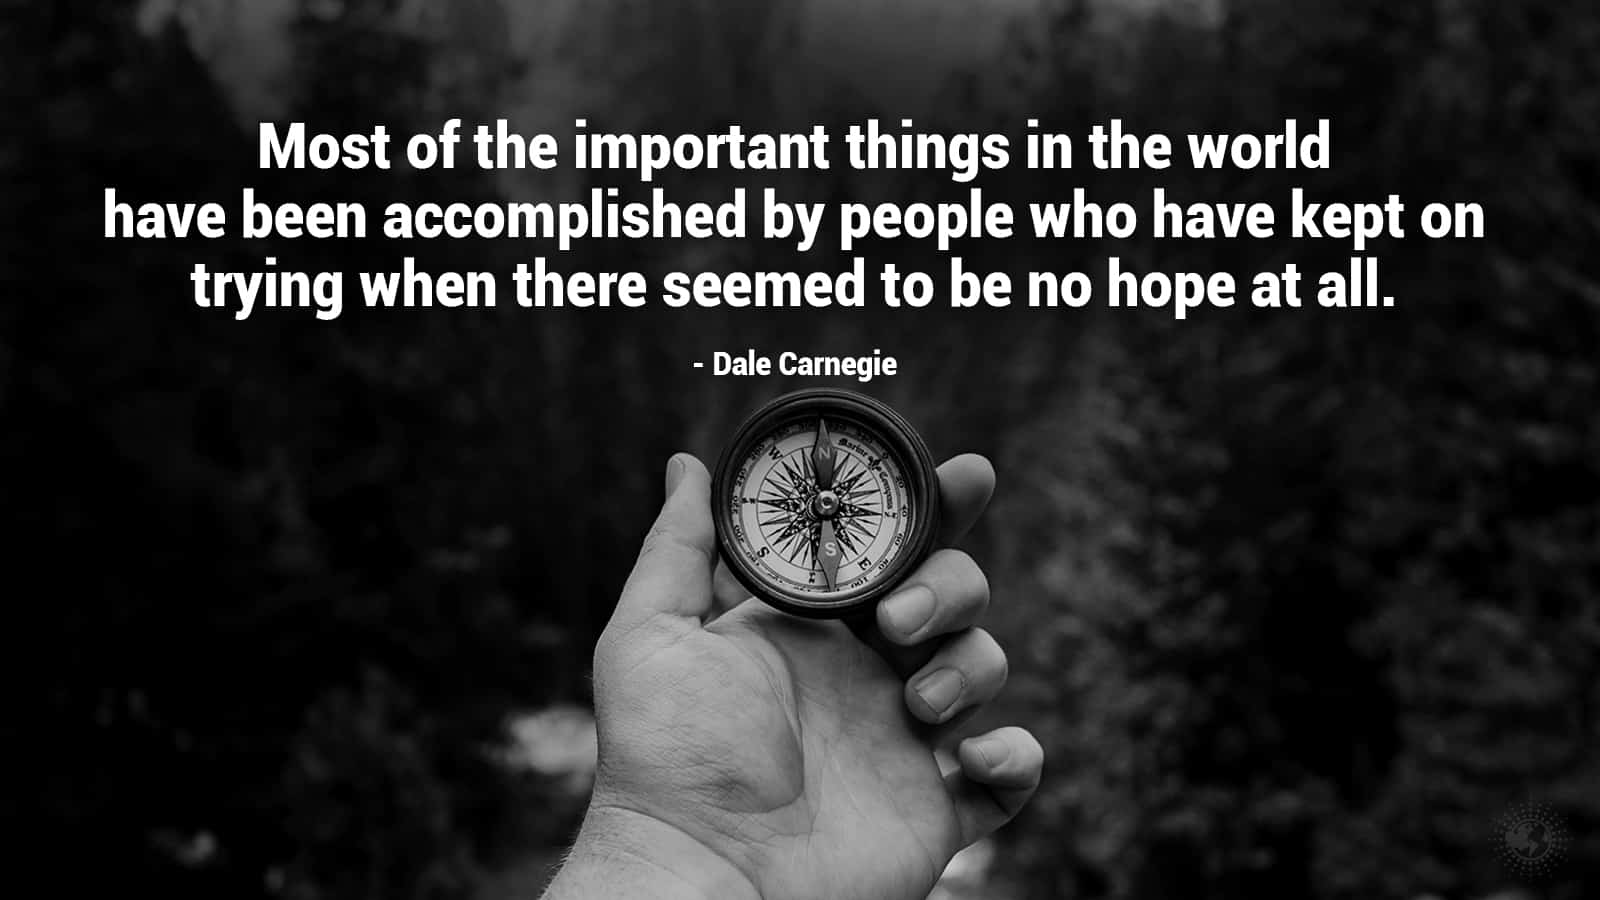 15 Quotes on Hope That Will Restore Your Faith in Humanity